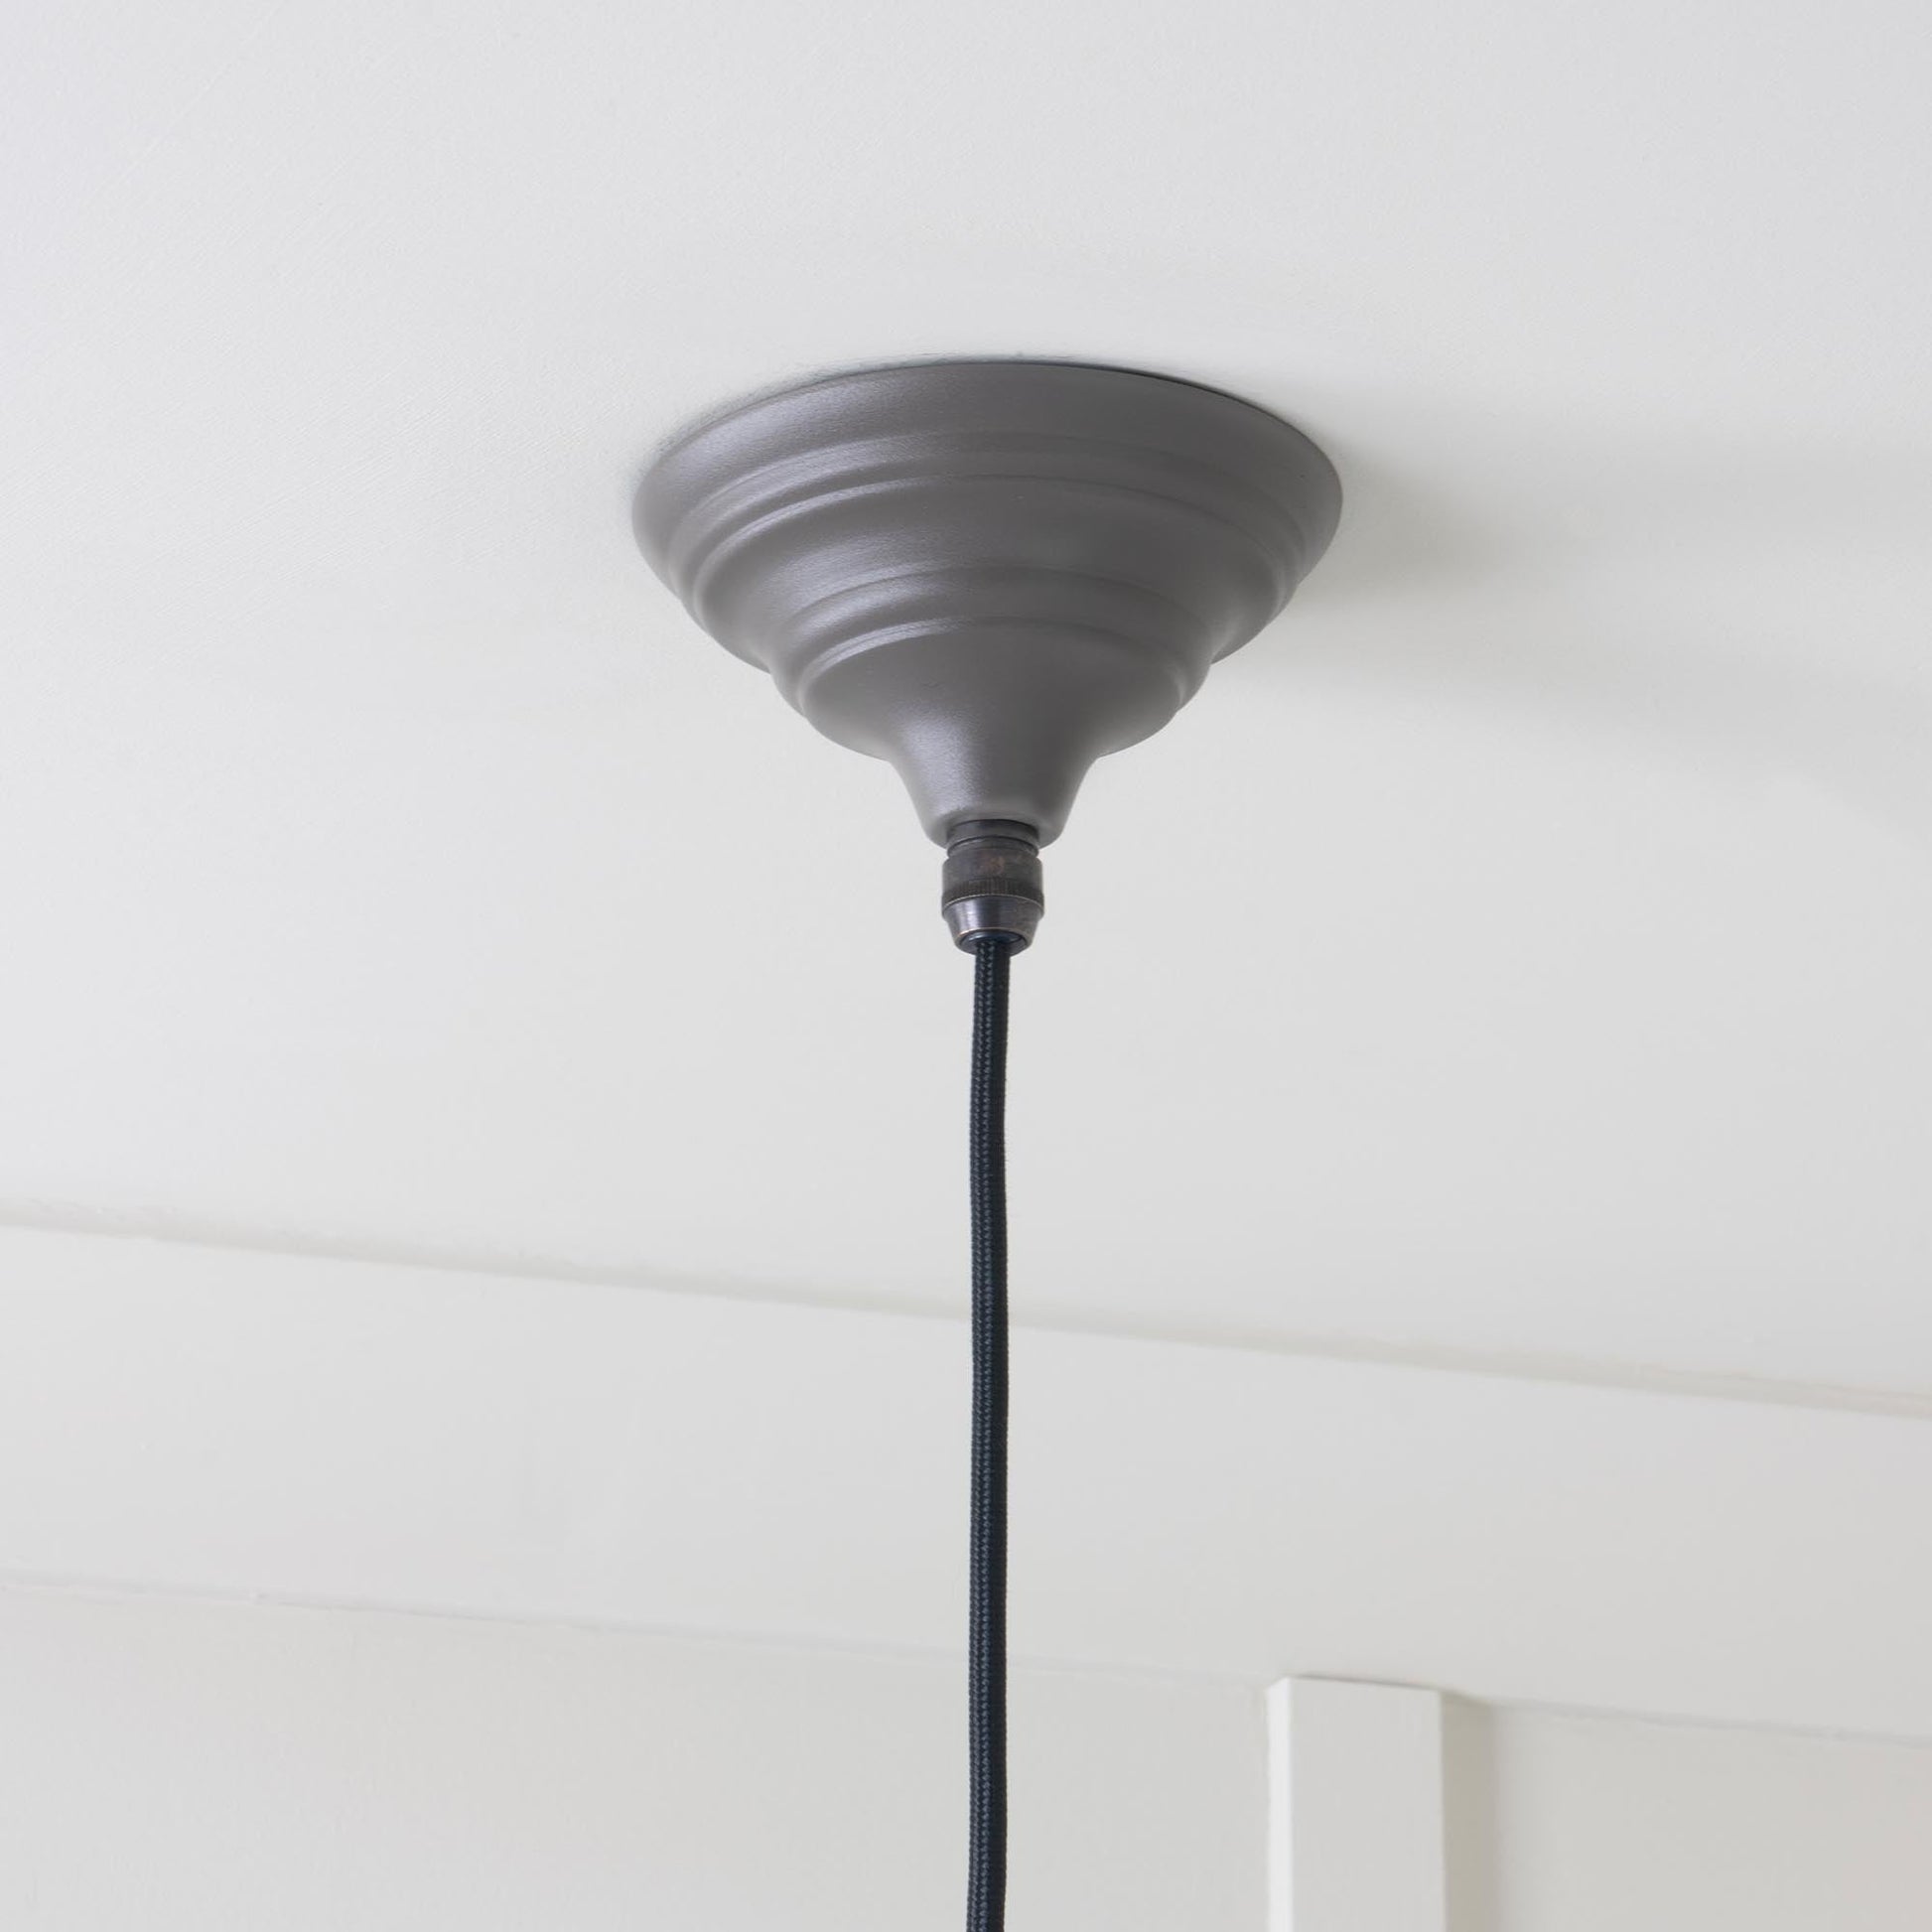 Smooth Brass Harborne Pendant Light Bluff, close up view of fitting and cable.